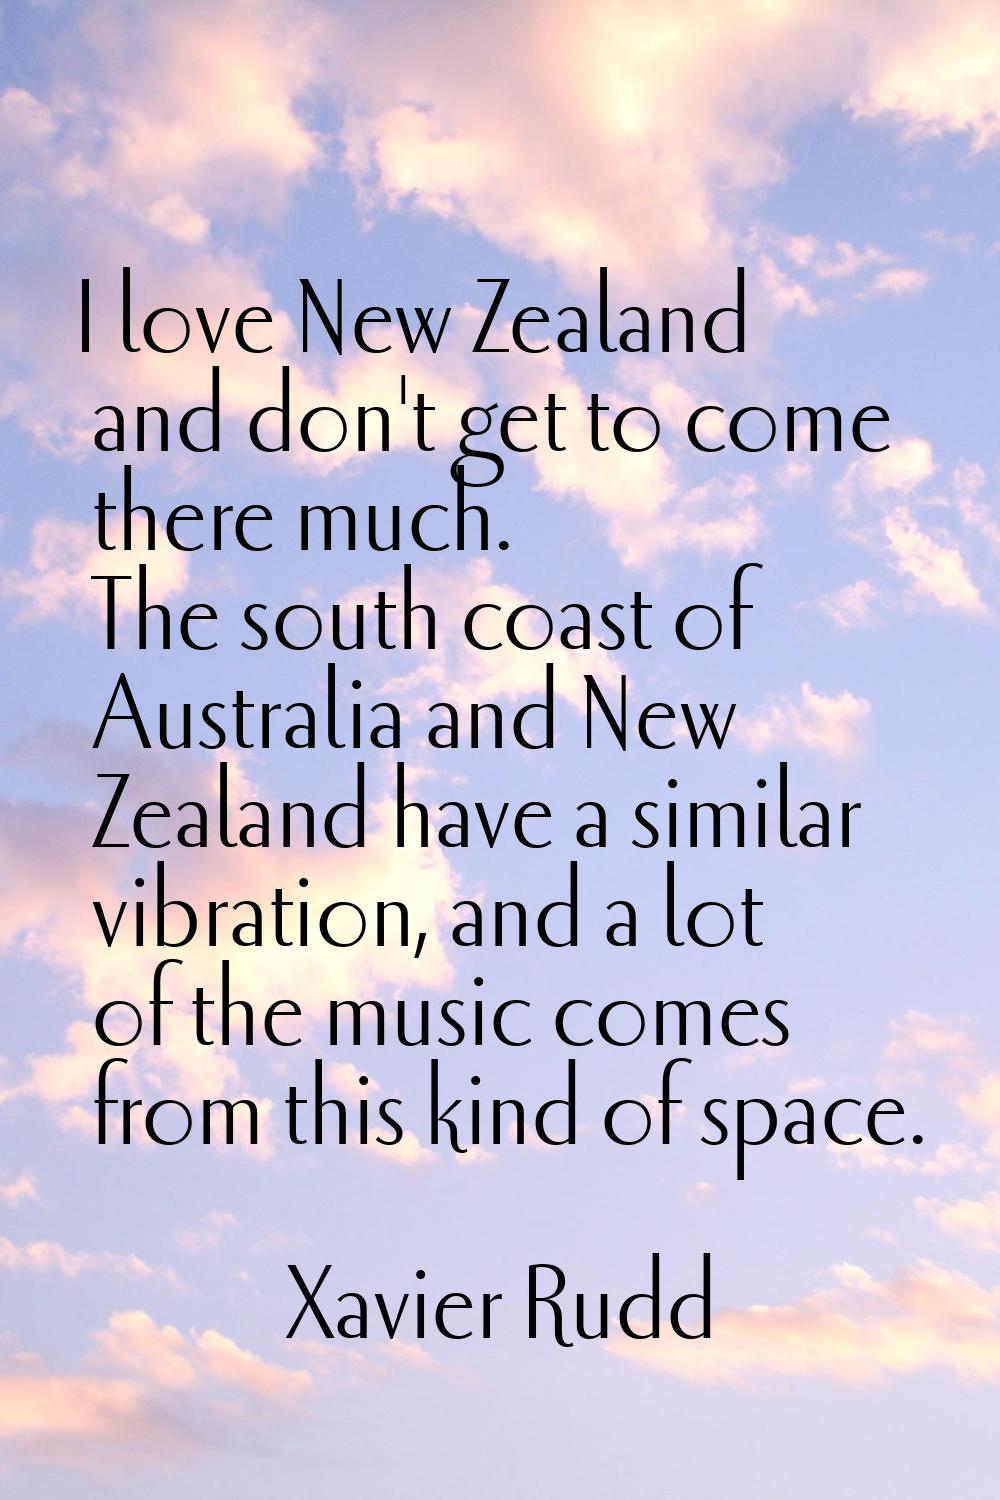 I love New Zealand and don't get to come there much. The south coast of Australia and New Zealand h